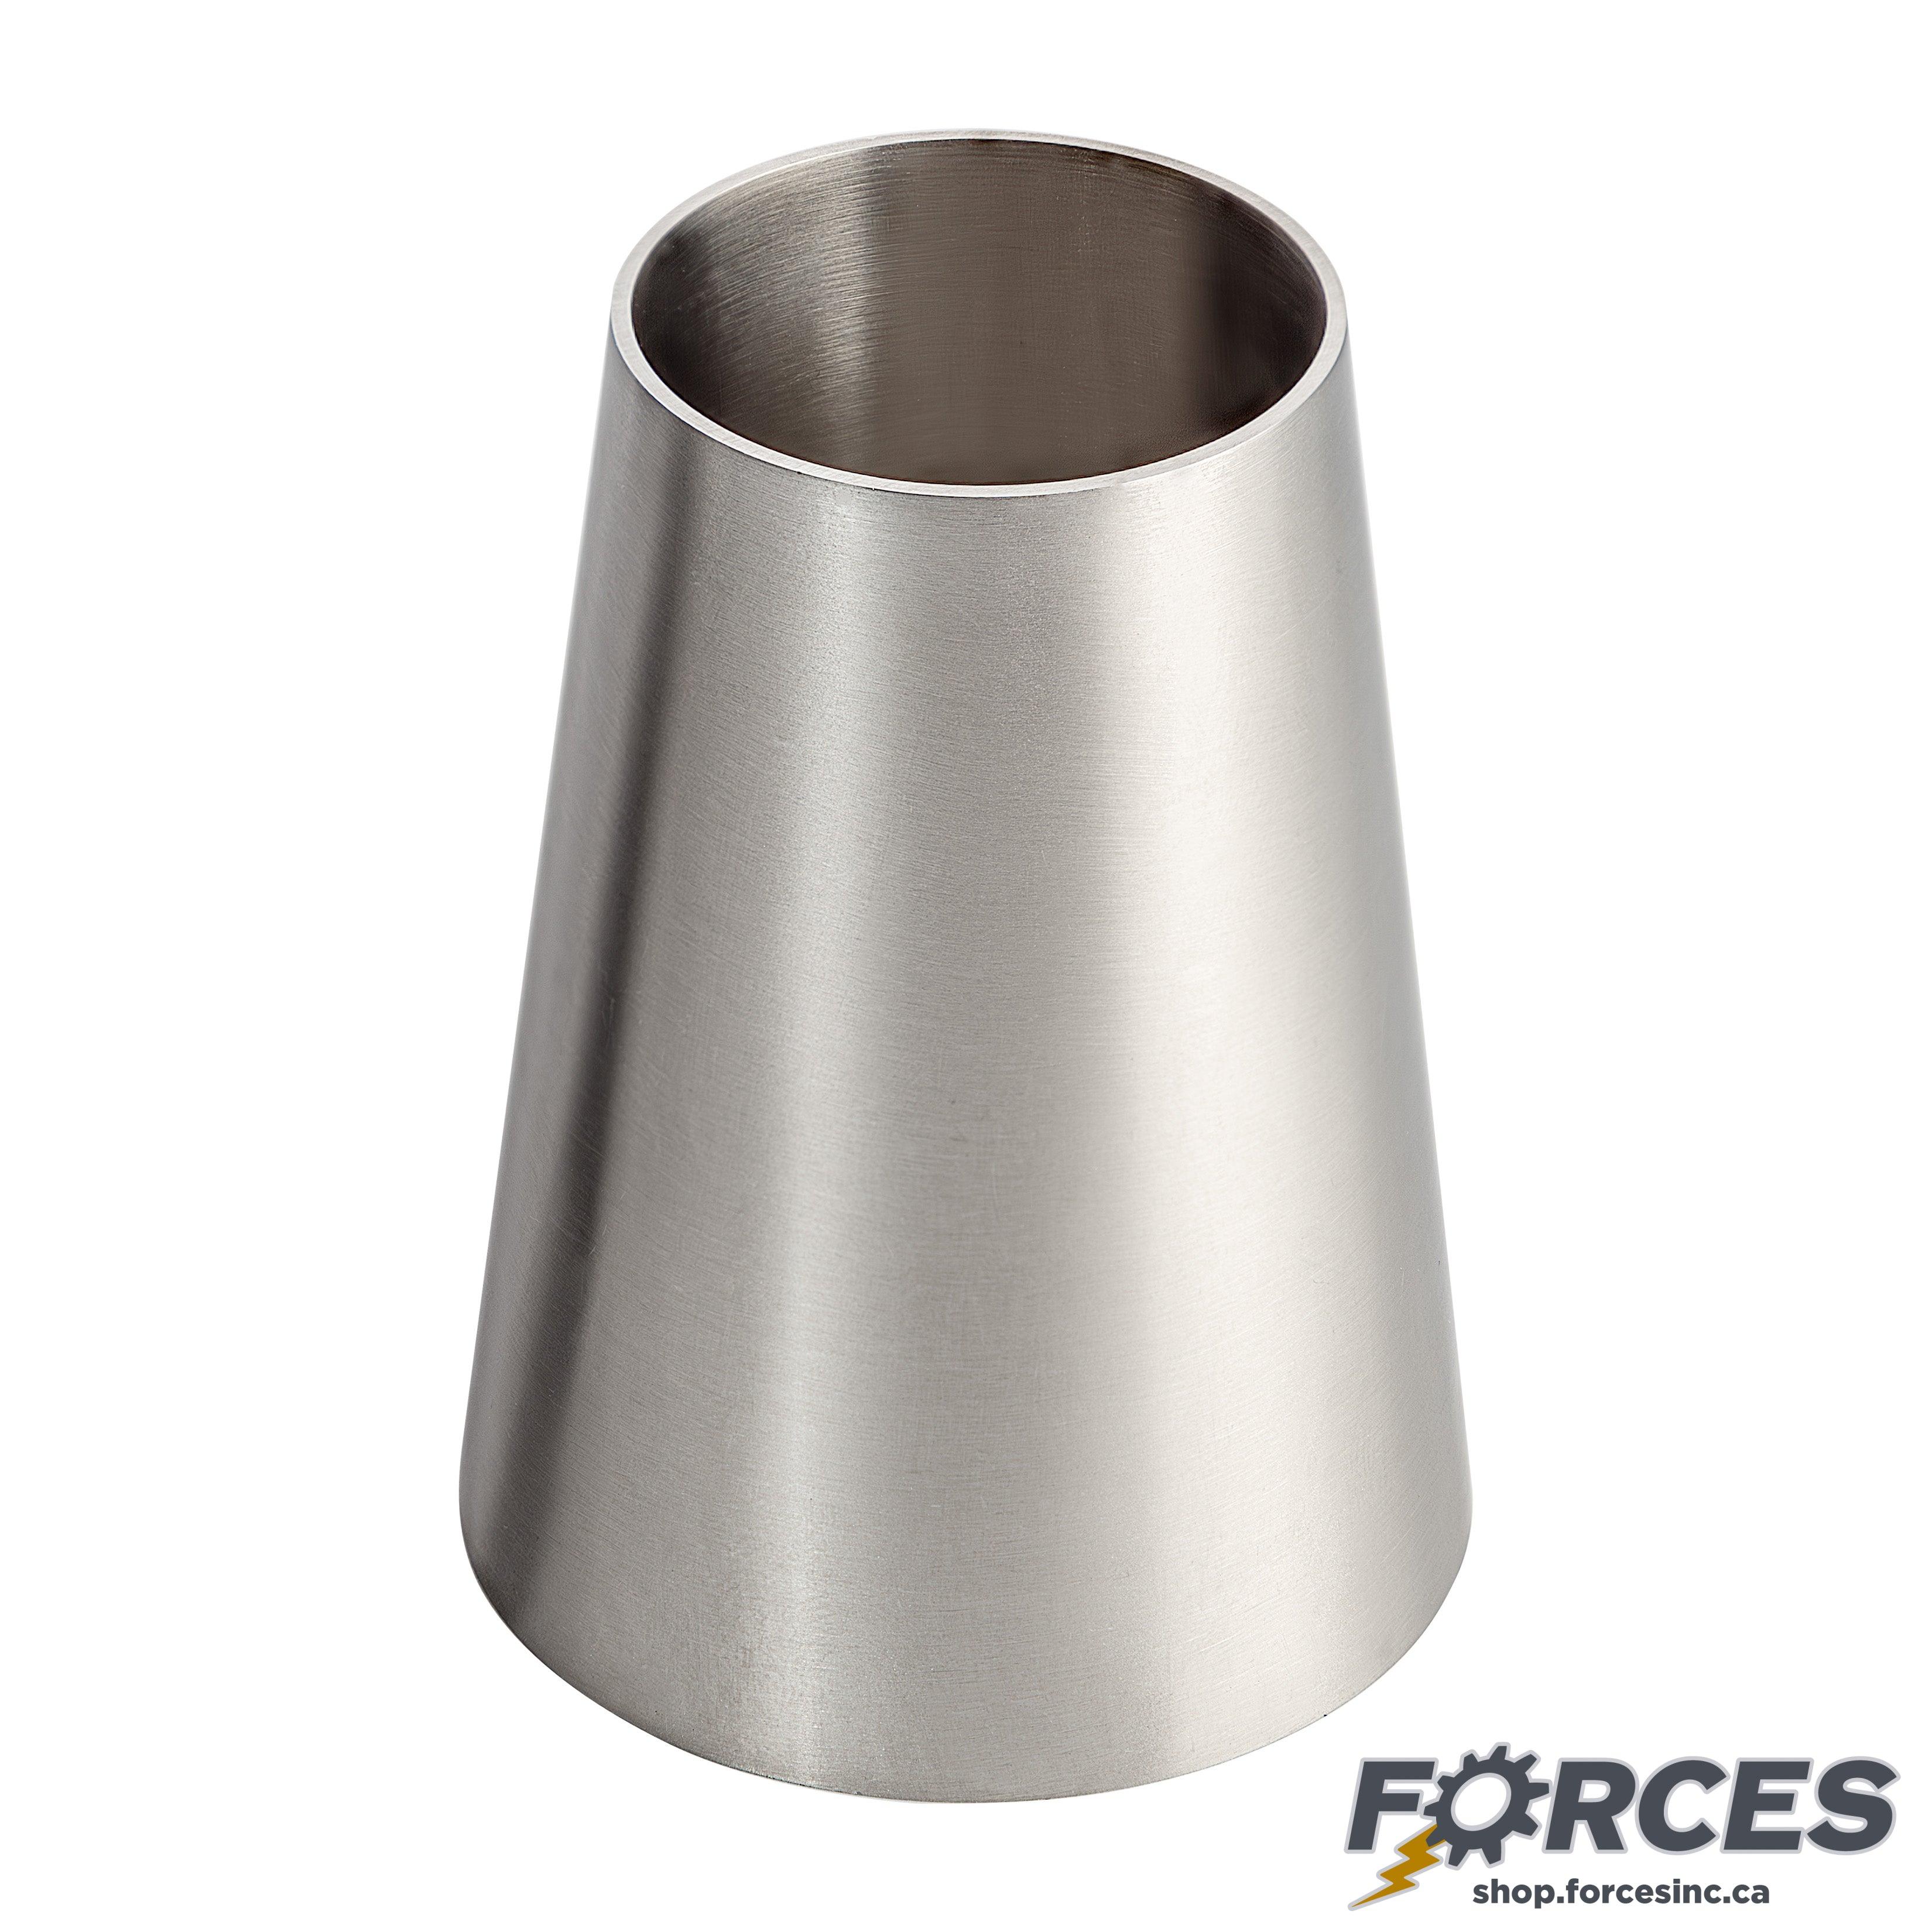 8" x 6" Butt Weld Concentric Reducer - Stainless Steel 316 - Forces Inc